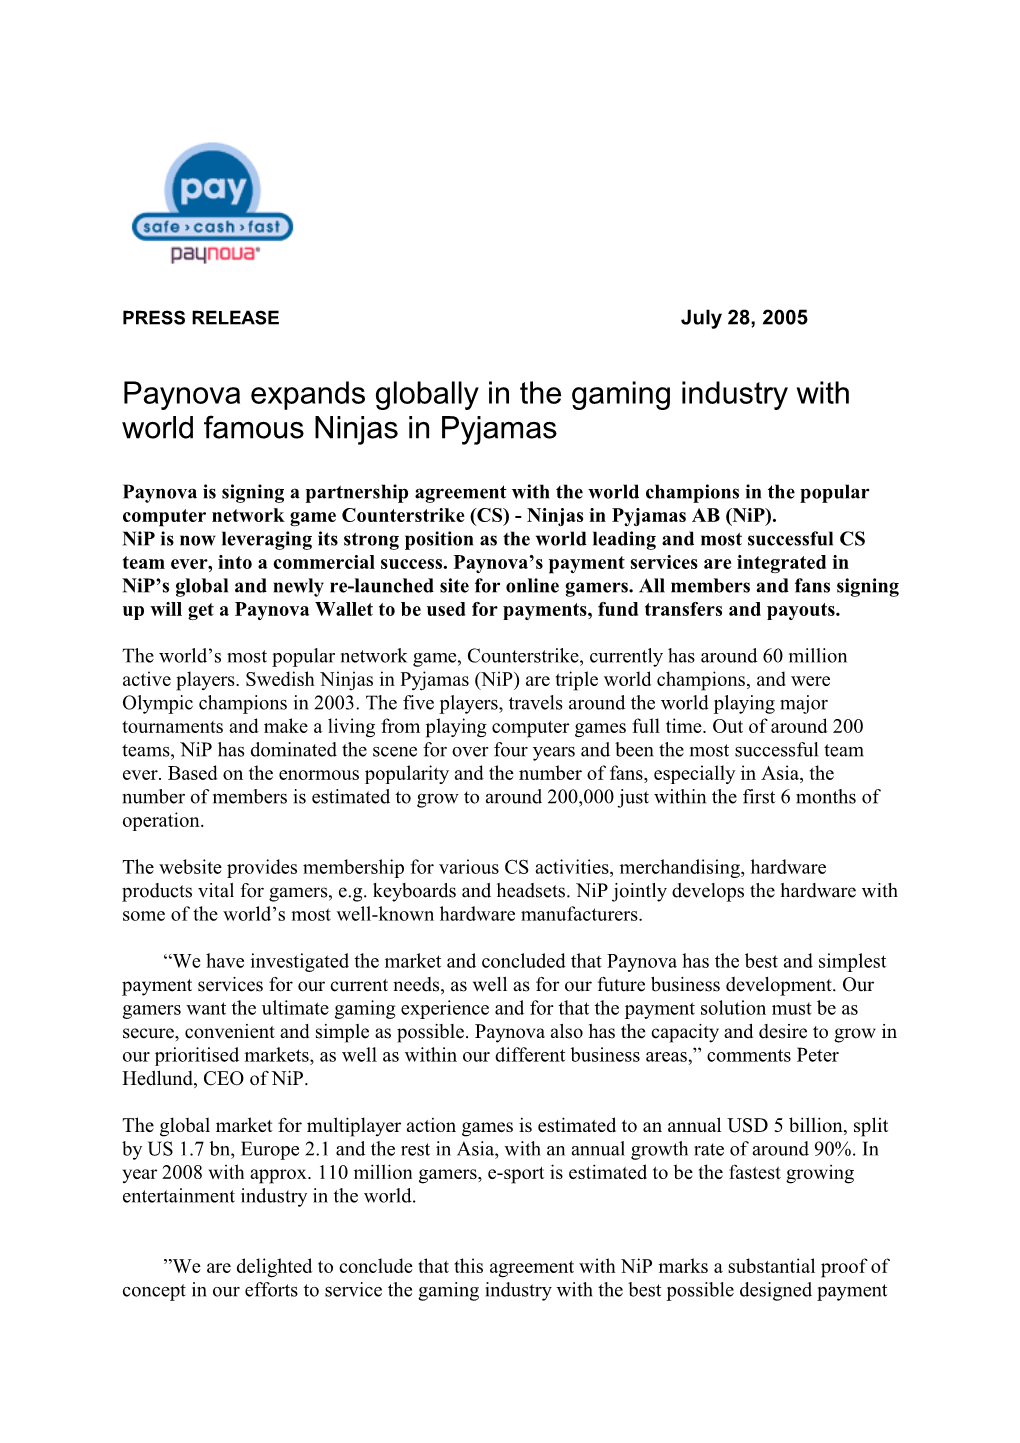 Paynova Expands Globally in the Gaming Industry with World Famous Ninjas in Pyjamas